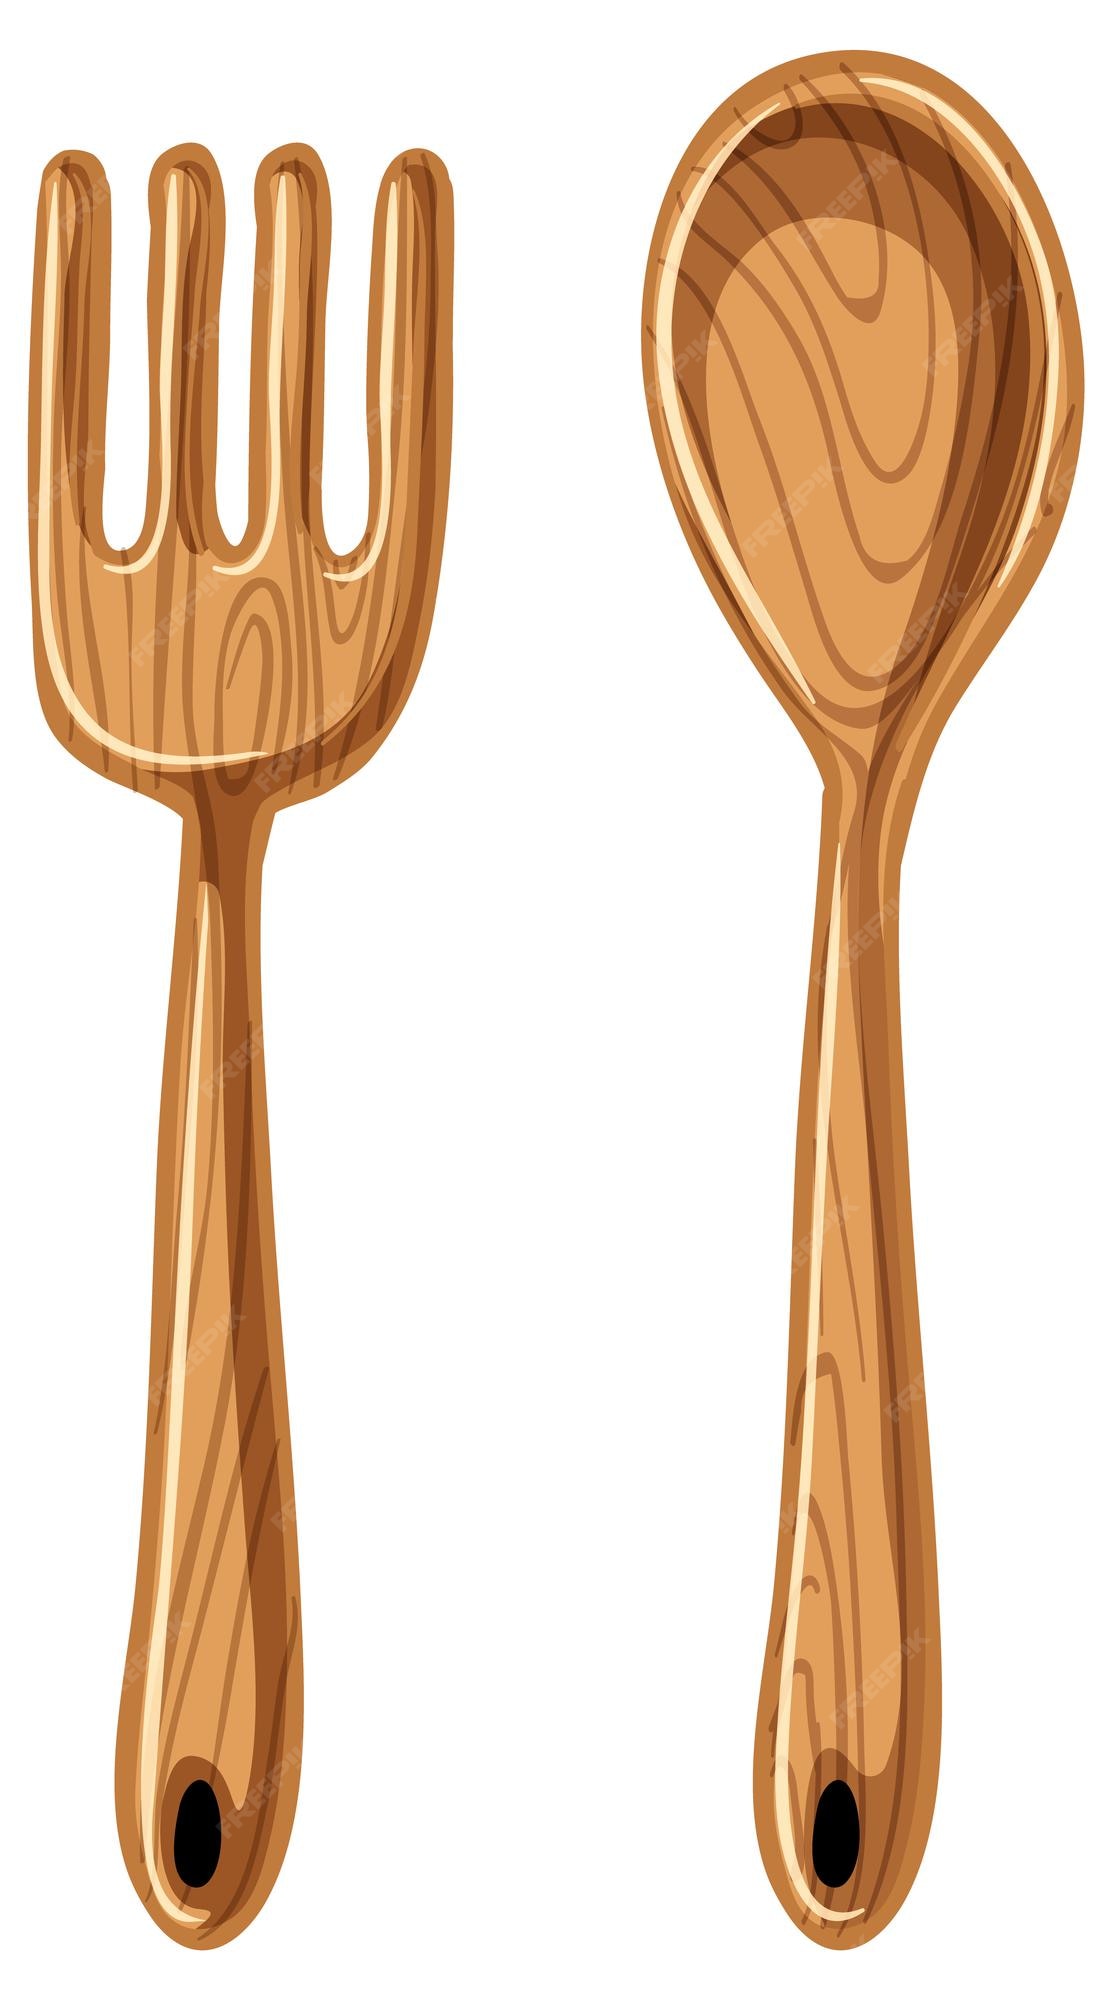 Wooden Spoon Images - Free Download on Freepik